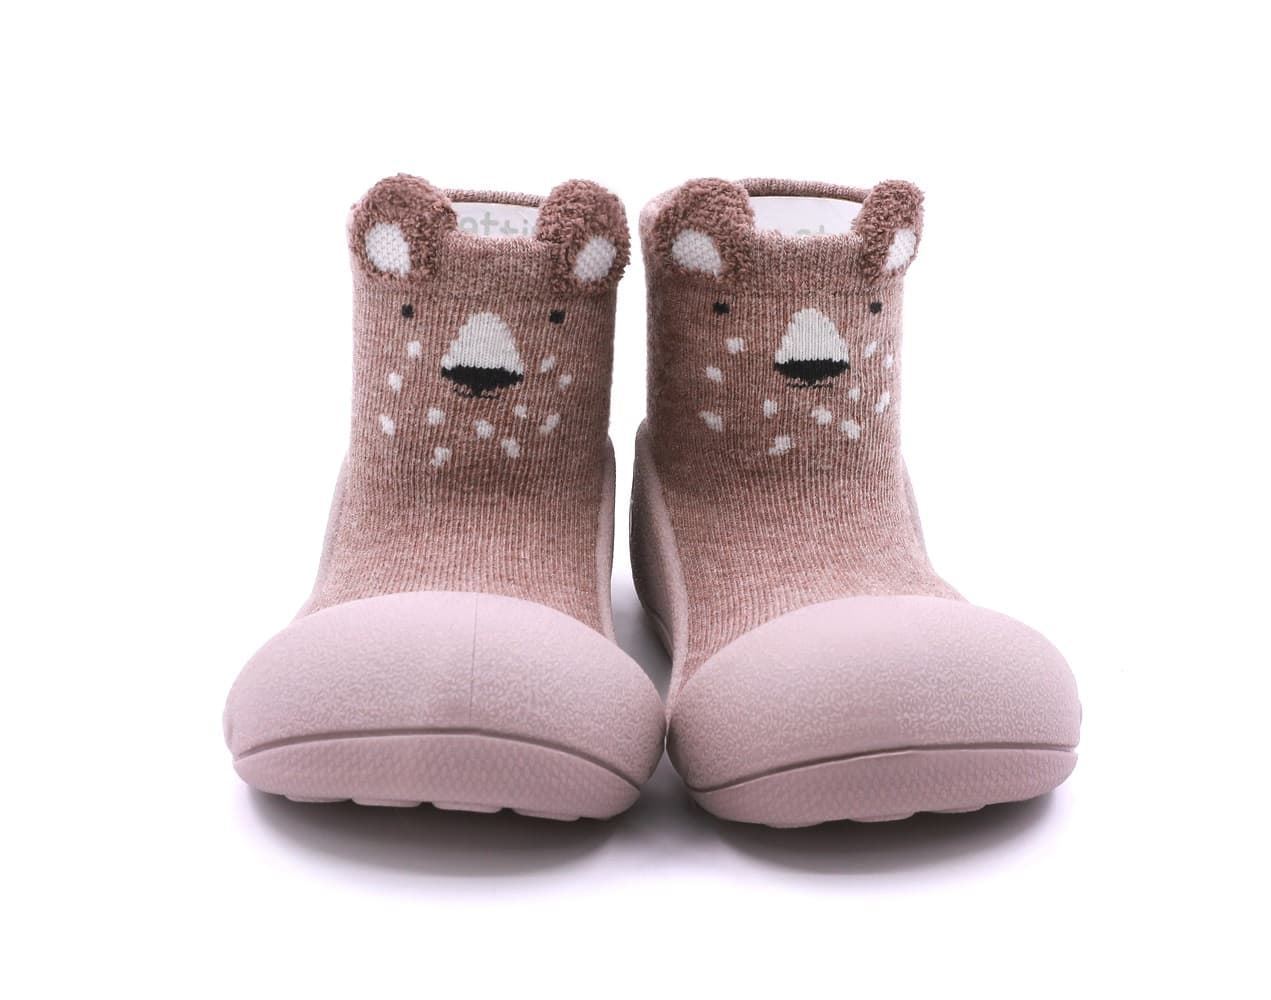 Attipas Respectful baby shoes Zootopia Bear Taupe - Image 3